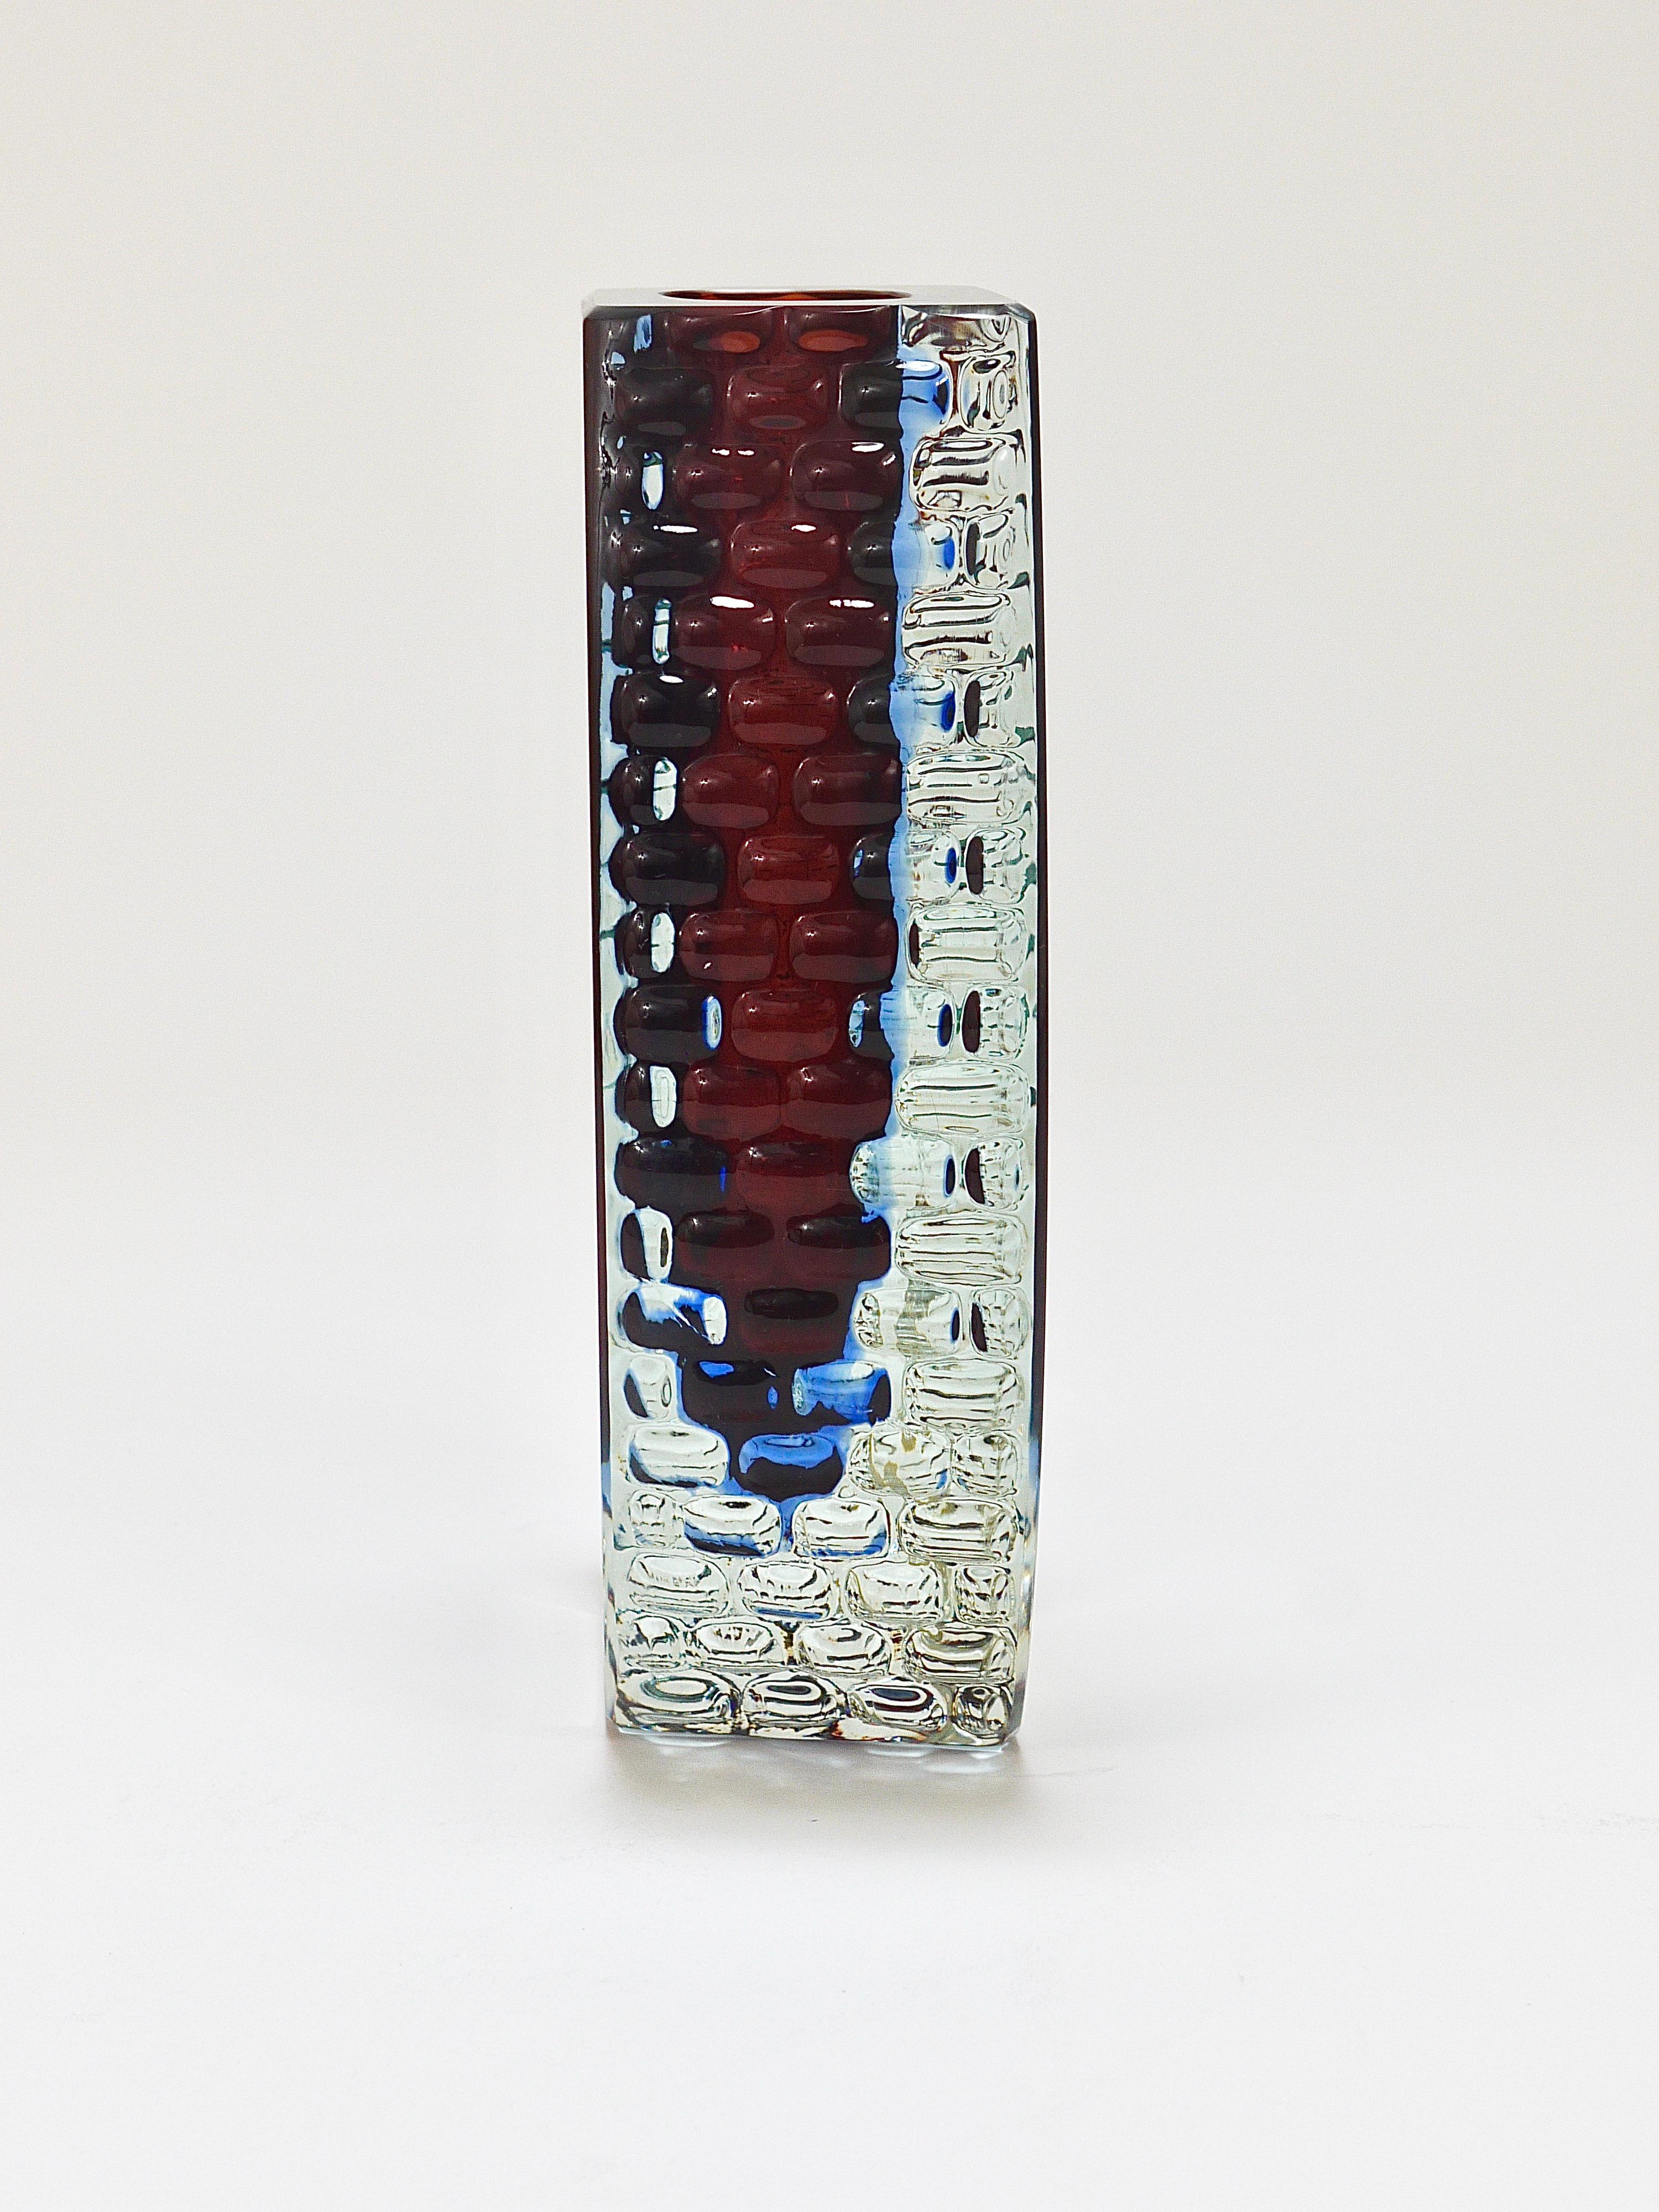 Large Mandruzzato Sommerso Murano Textured Facetted Art Glass Vase, Italy, 1970s For Sale 7